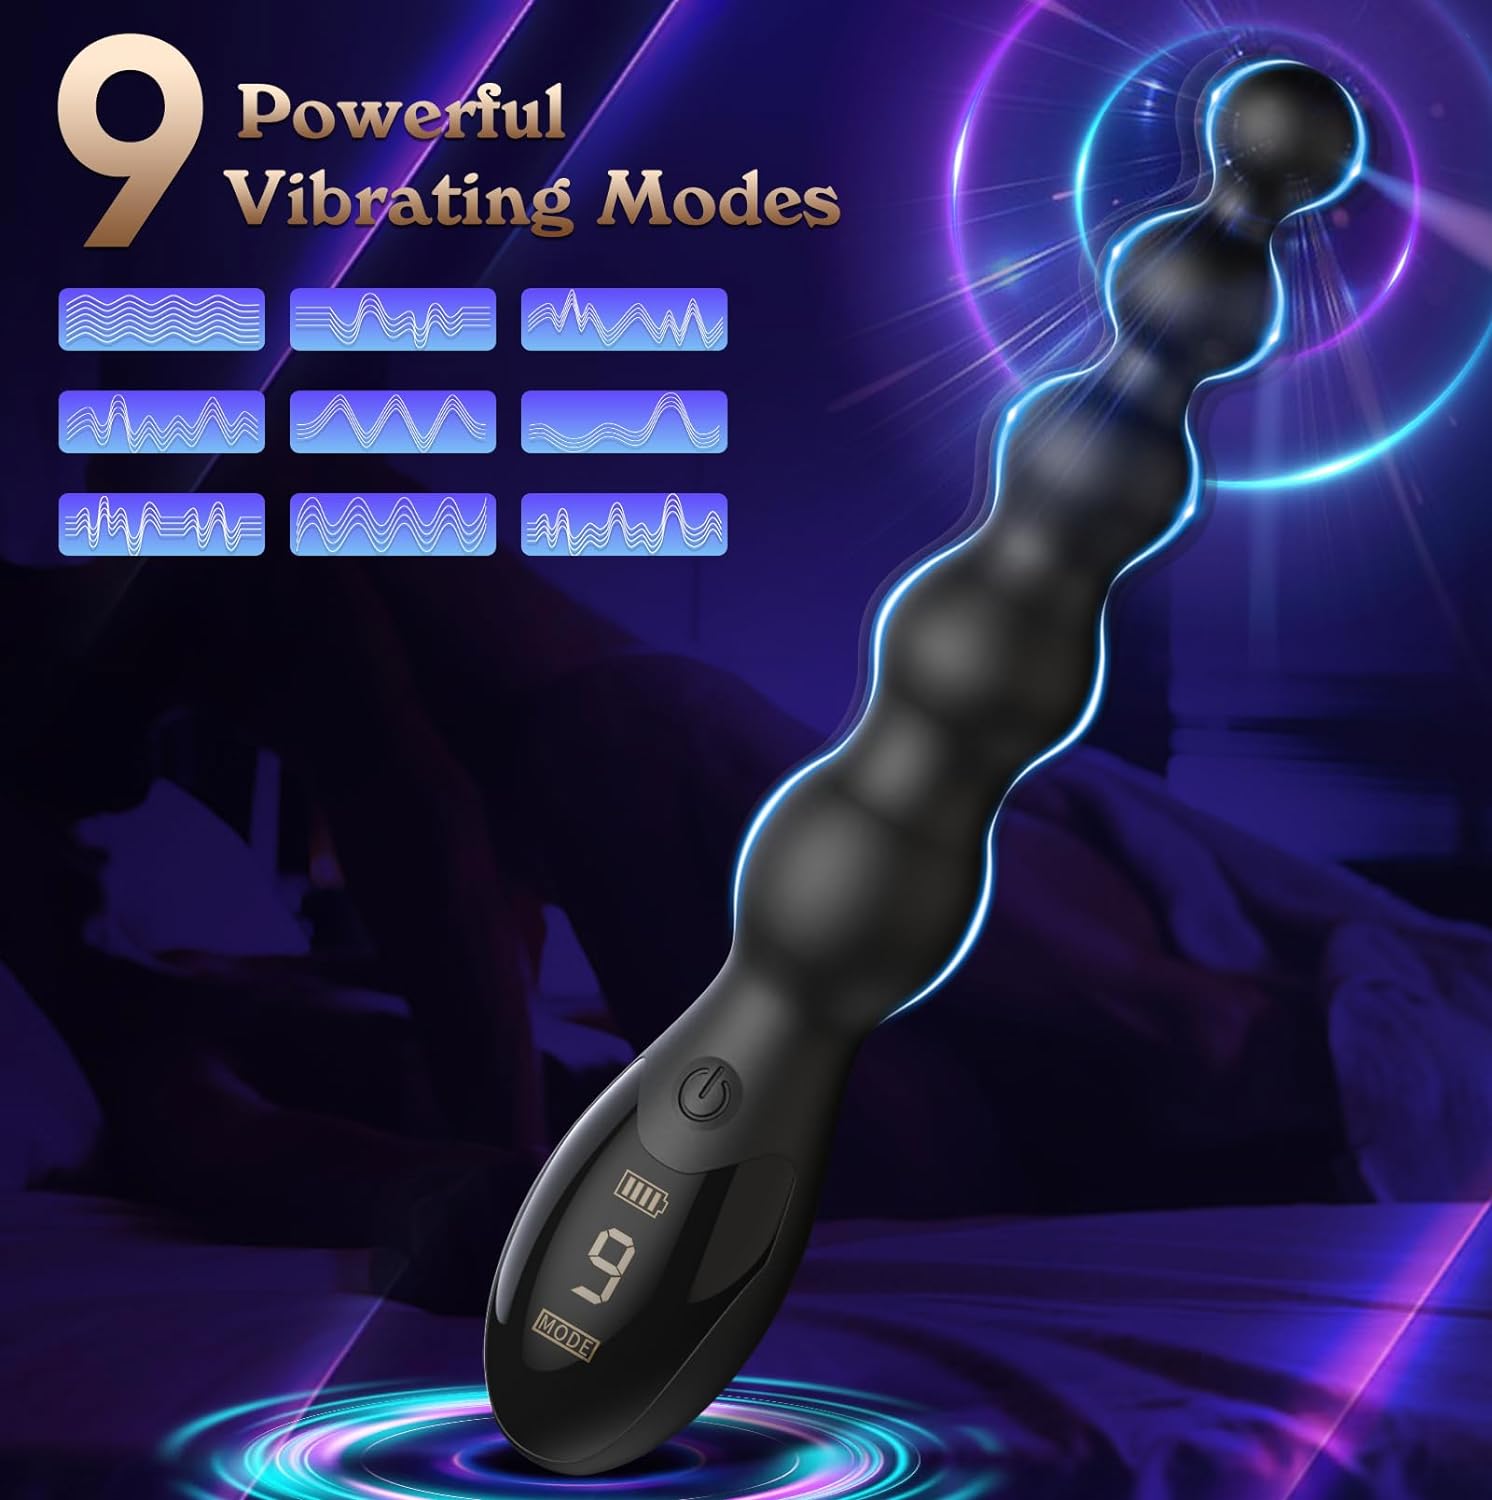 Male Sex Toys Anal Plug - Adult Toys Anal Beads Sex Toys for Men and Women Adult Toy Sex Toy Anal Vibrators Graduated & Display Design Anal Toys Dildo Prostate Massager with 9 Vibration Modes